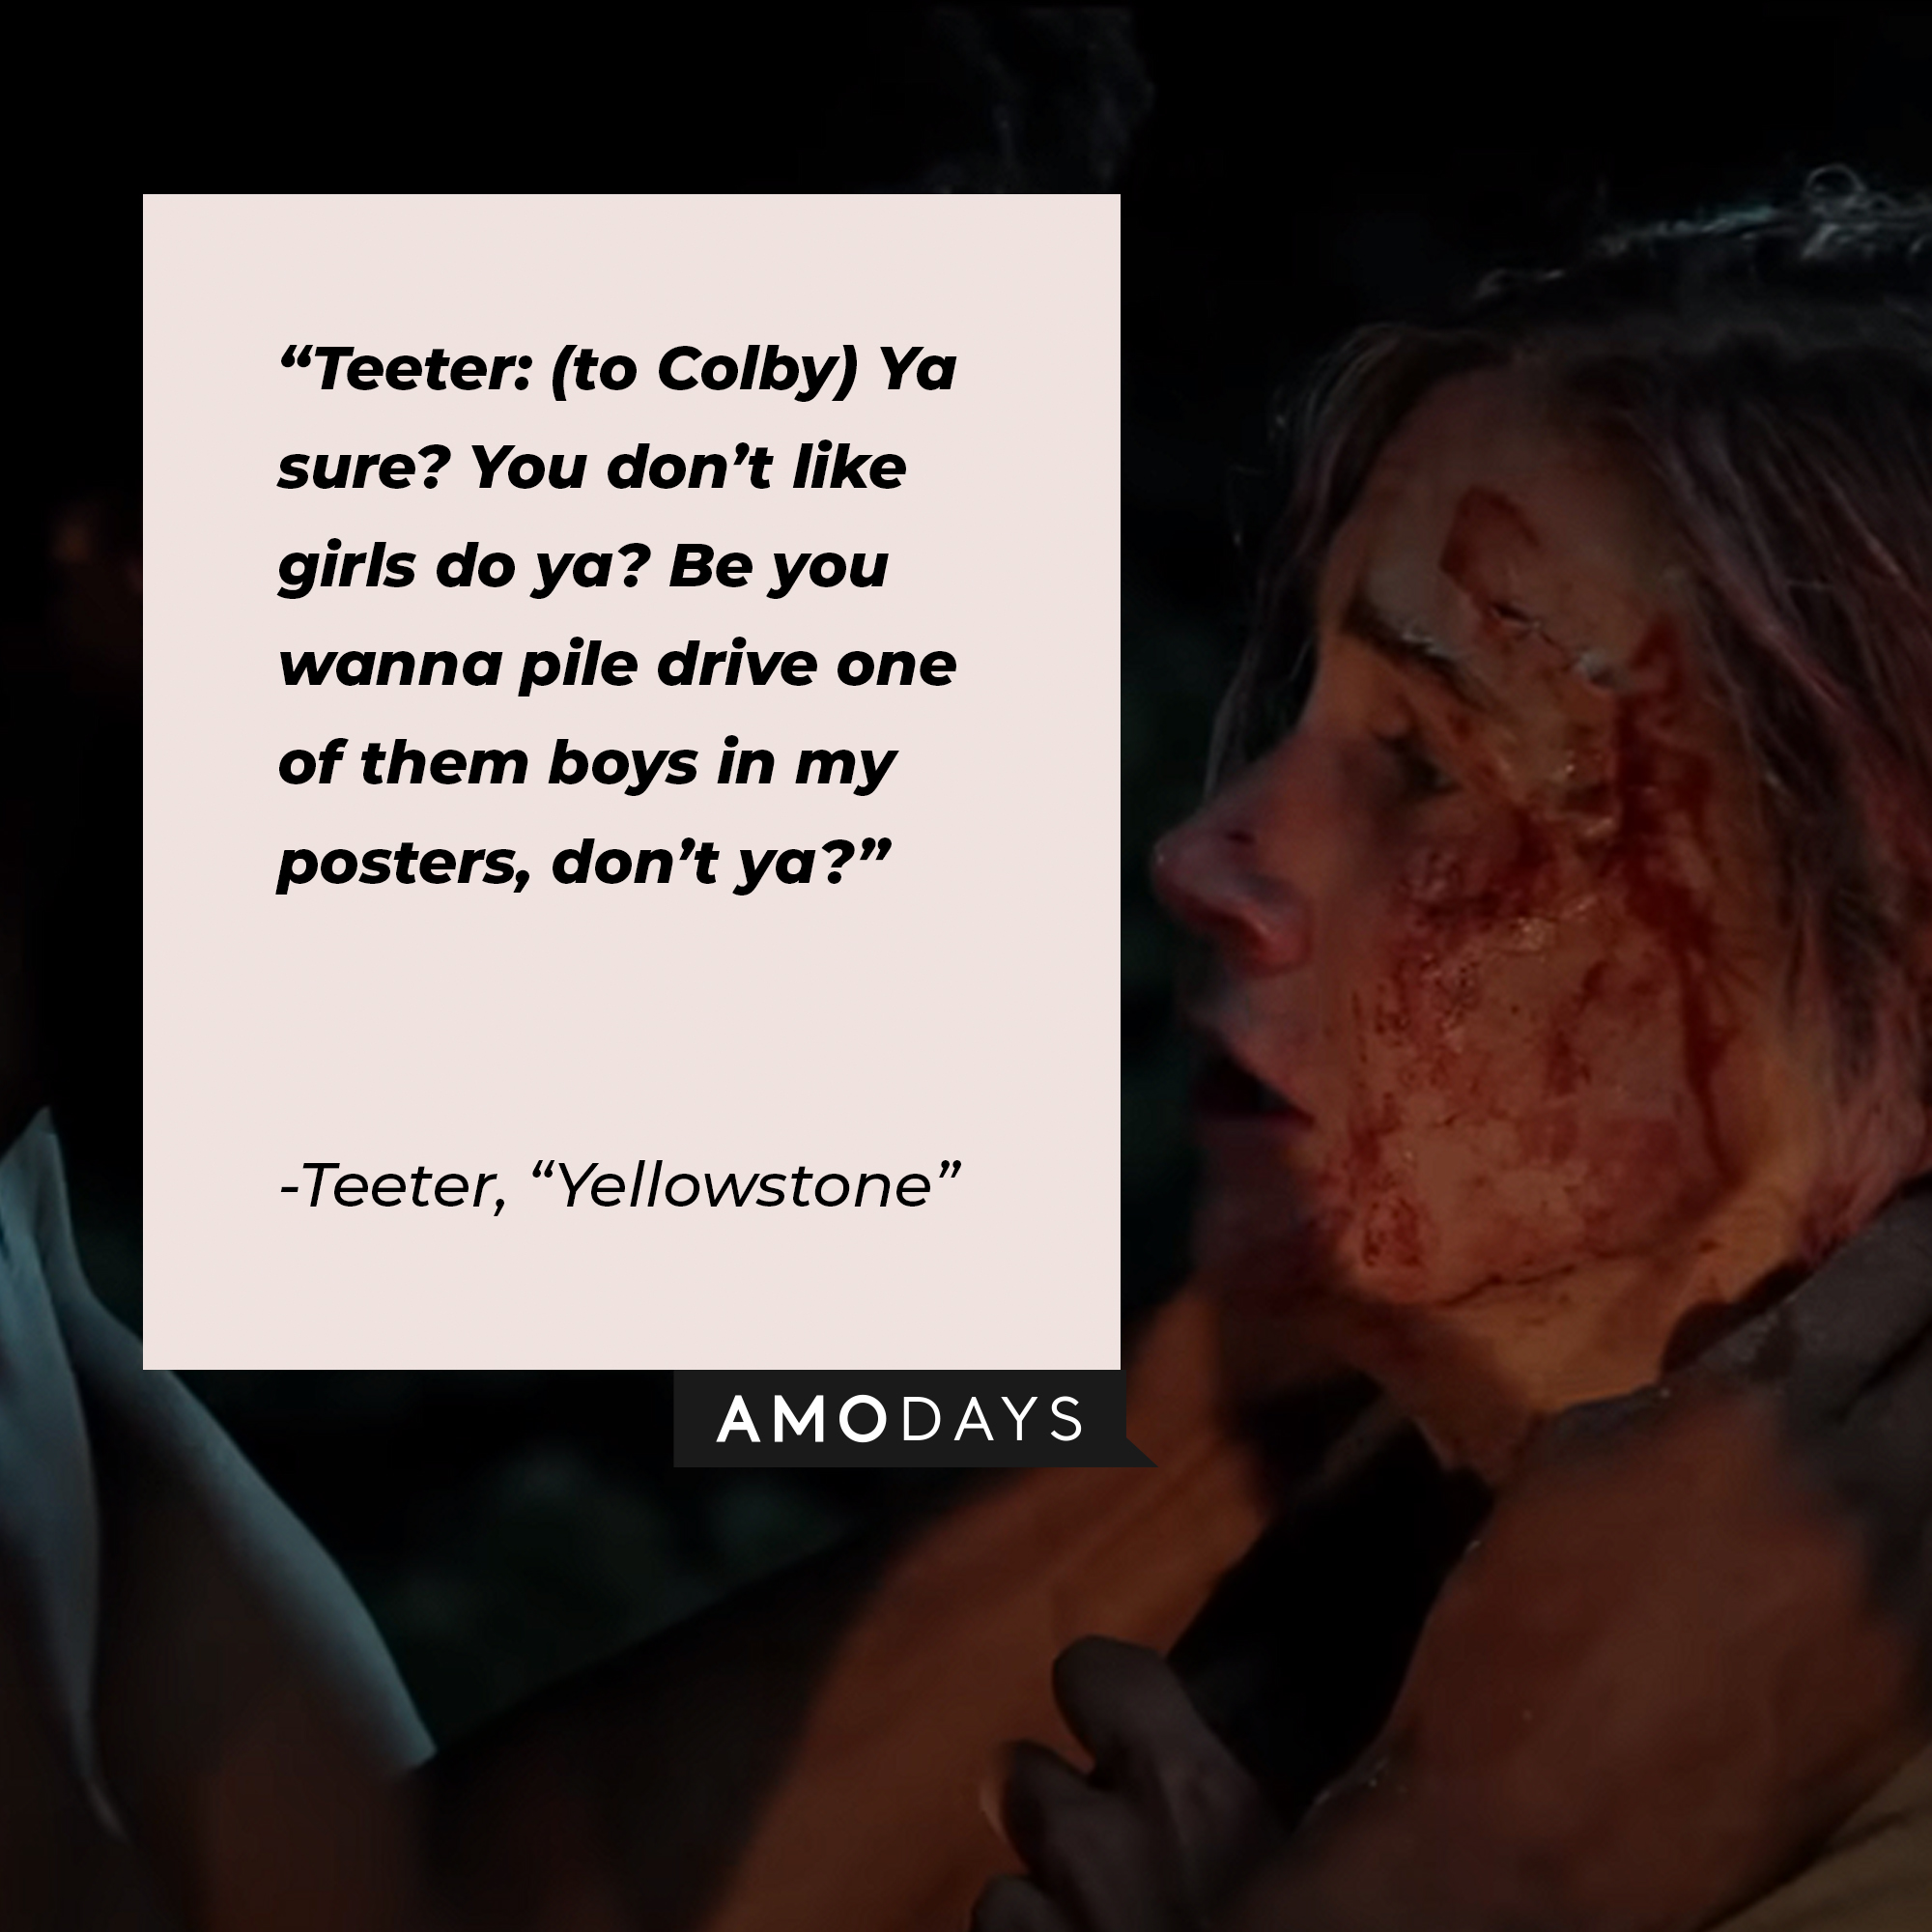 Teeter’s quote from “Yellowstone”: “Teeter: (to Colby) Ya sure? You don’t like girls do ya? Be you wanna pile drive one of them boys in my posters, don’t ya?” | Source: youtube.com/yellowstone